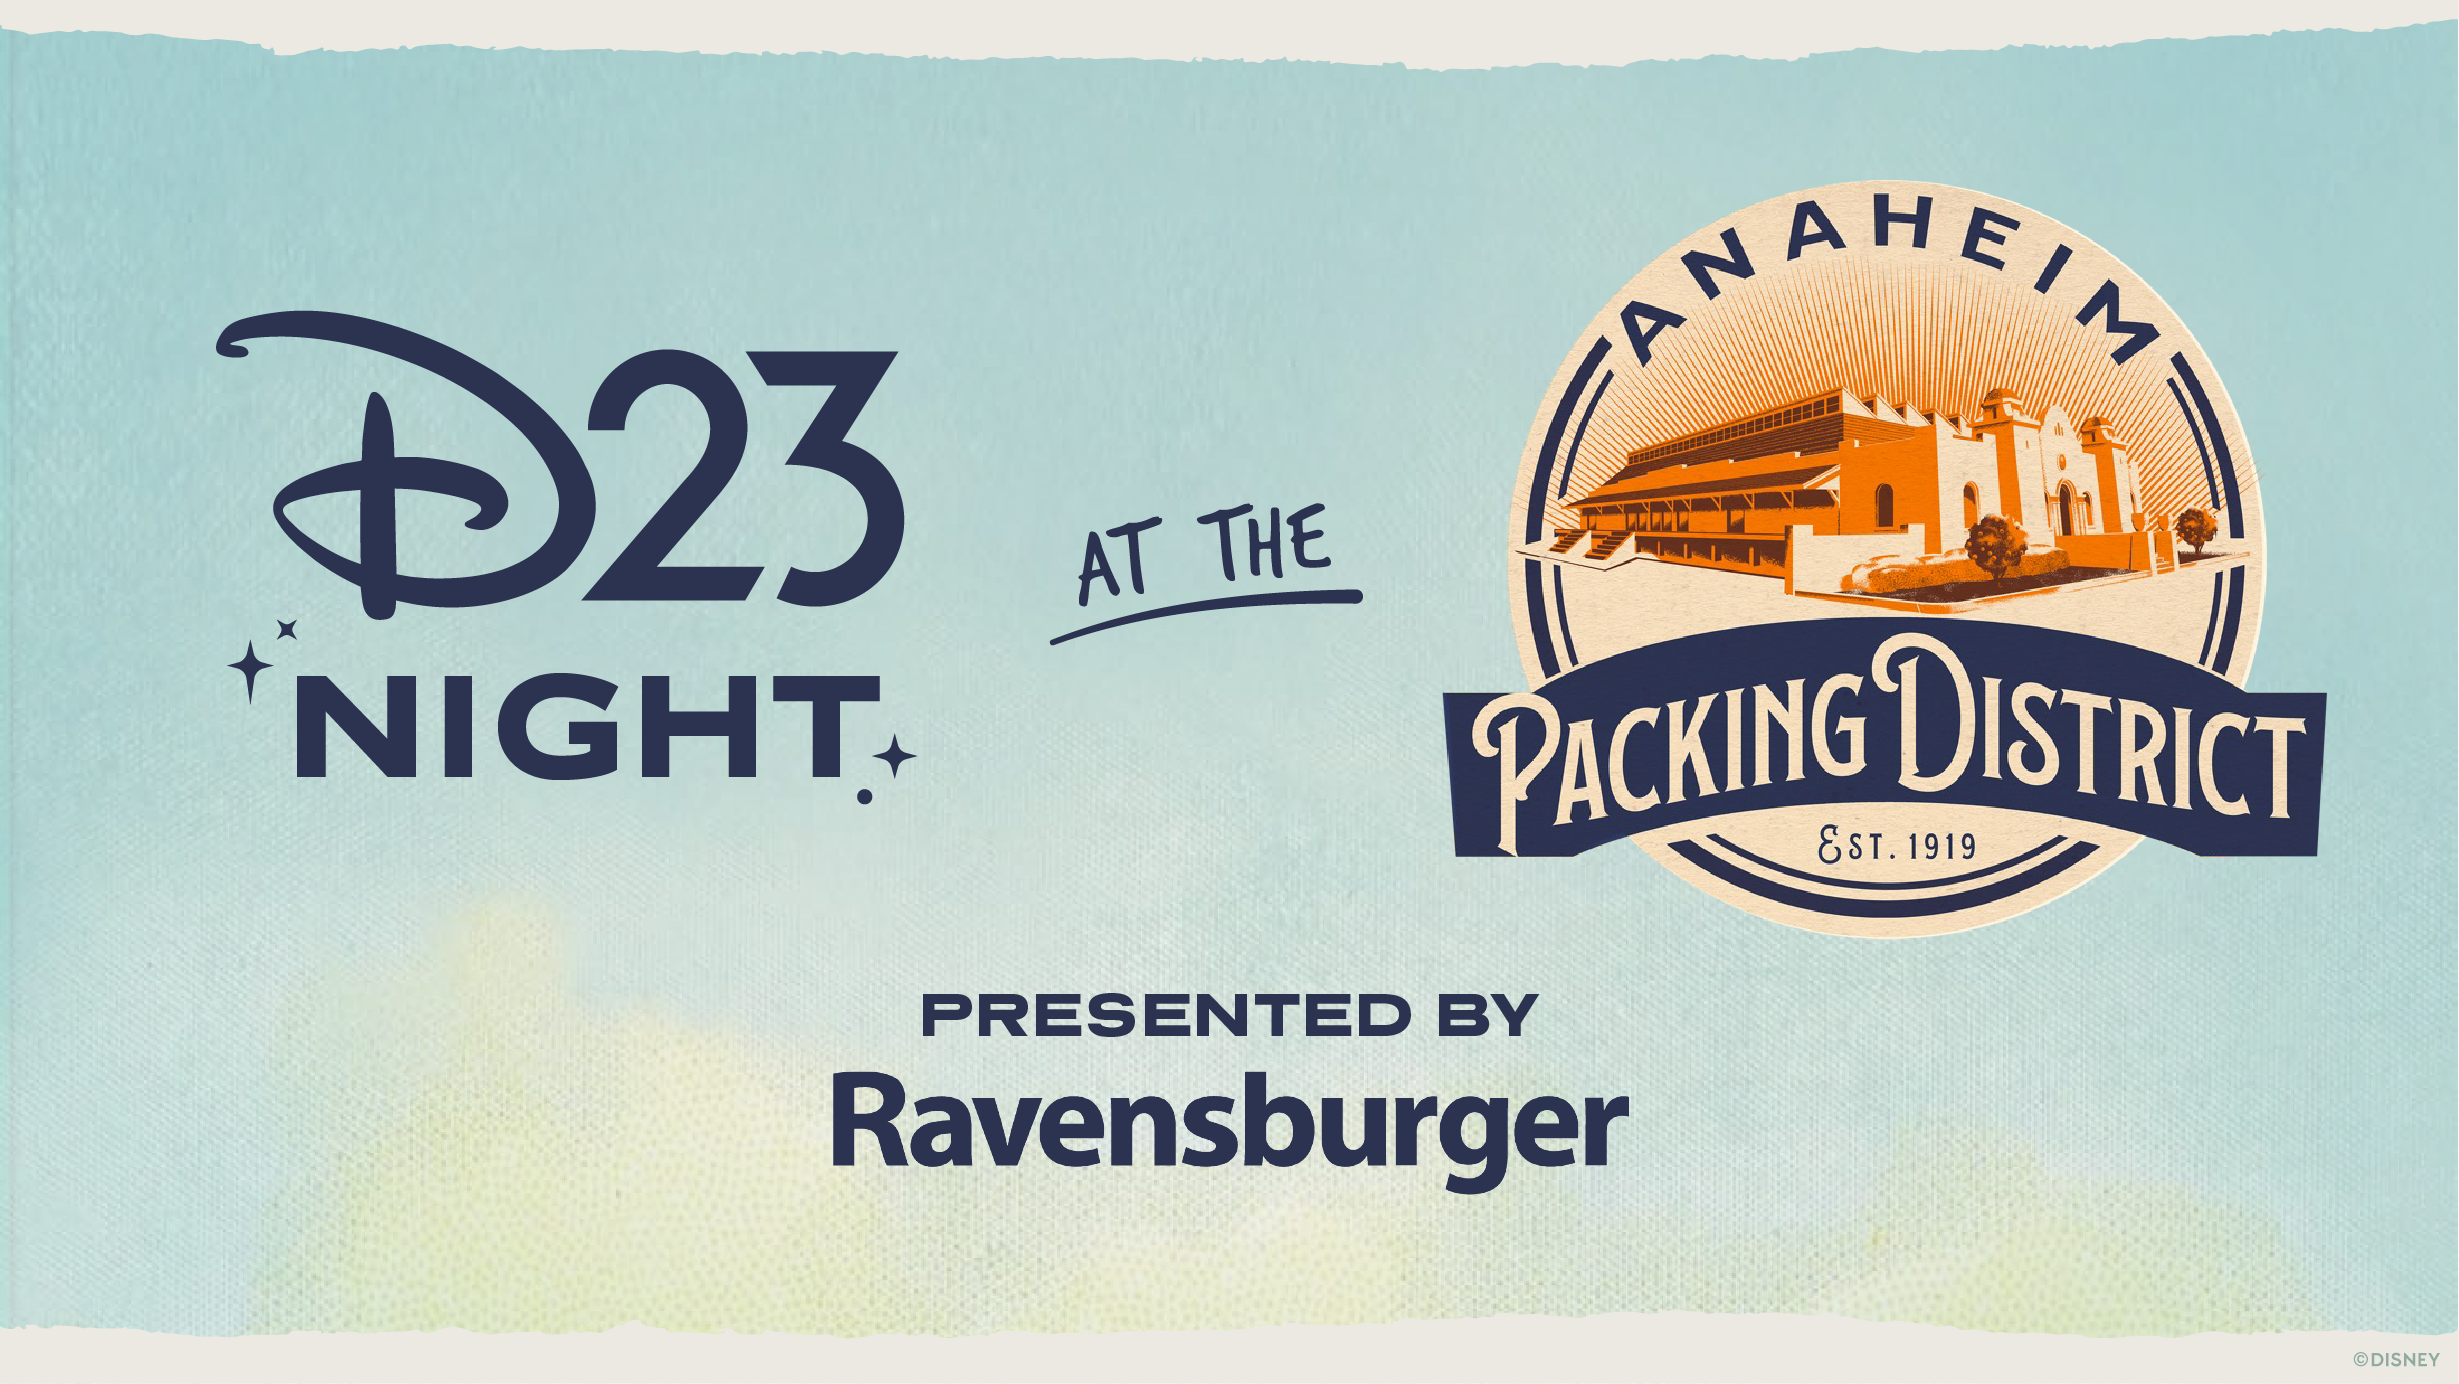 Image of the event name D23 Night at the Anaheim Packing District with the Anaheim Packing District Est. 1919 presented by Ravensburger logo on a blue gradient background.